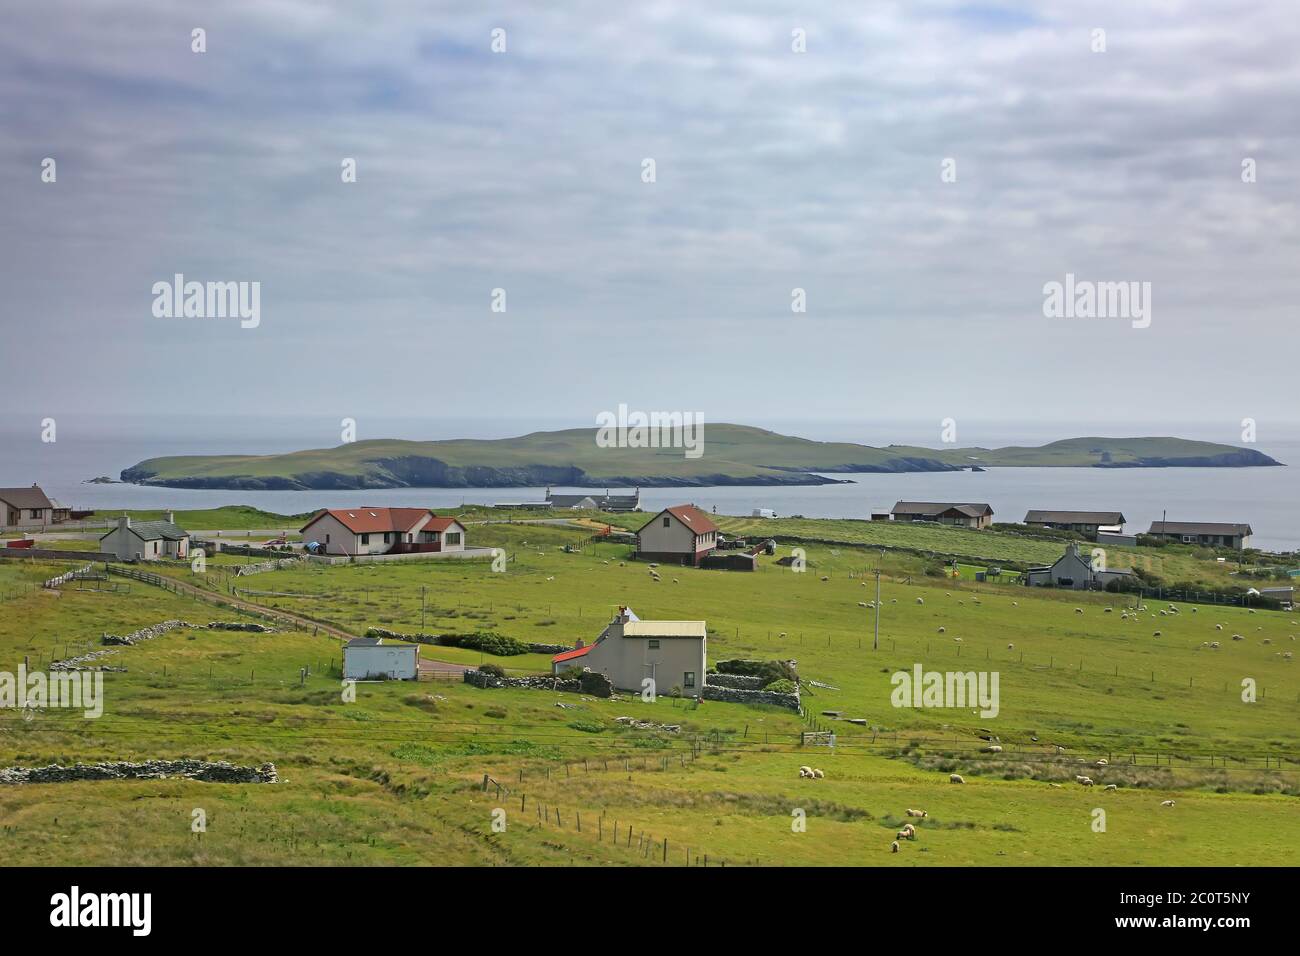 Beautiful landscape with villages & houses & islands in the background, Shetland Islands, Scotland. Stock Photo